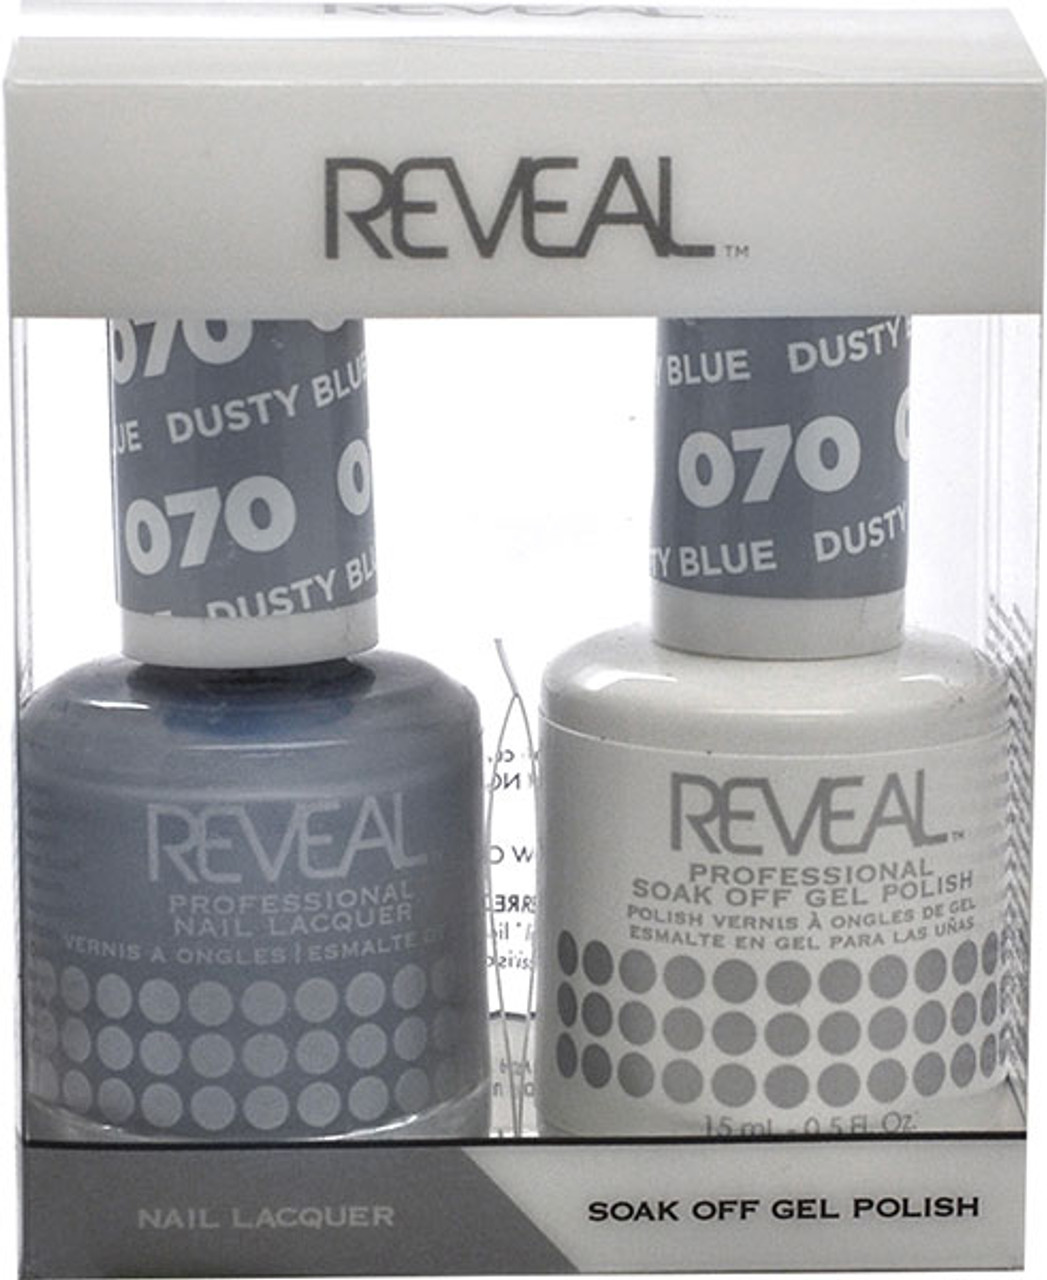 Reveal Gel Polish & Nail Lacquer Matching Duo - DUSTY BLUE - .5 oz